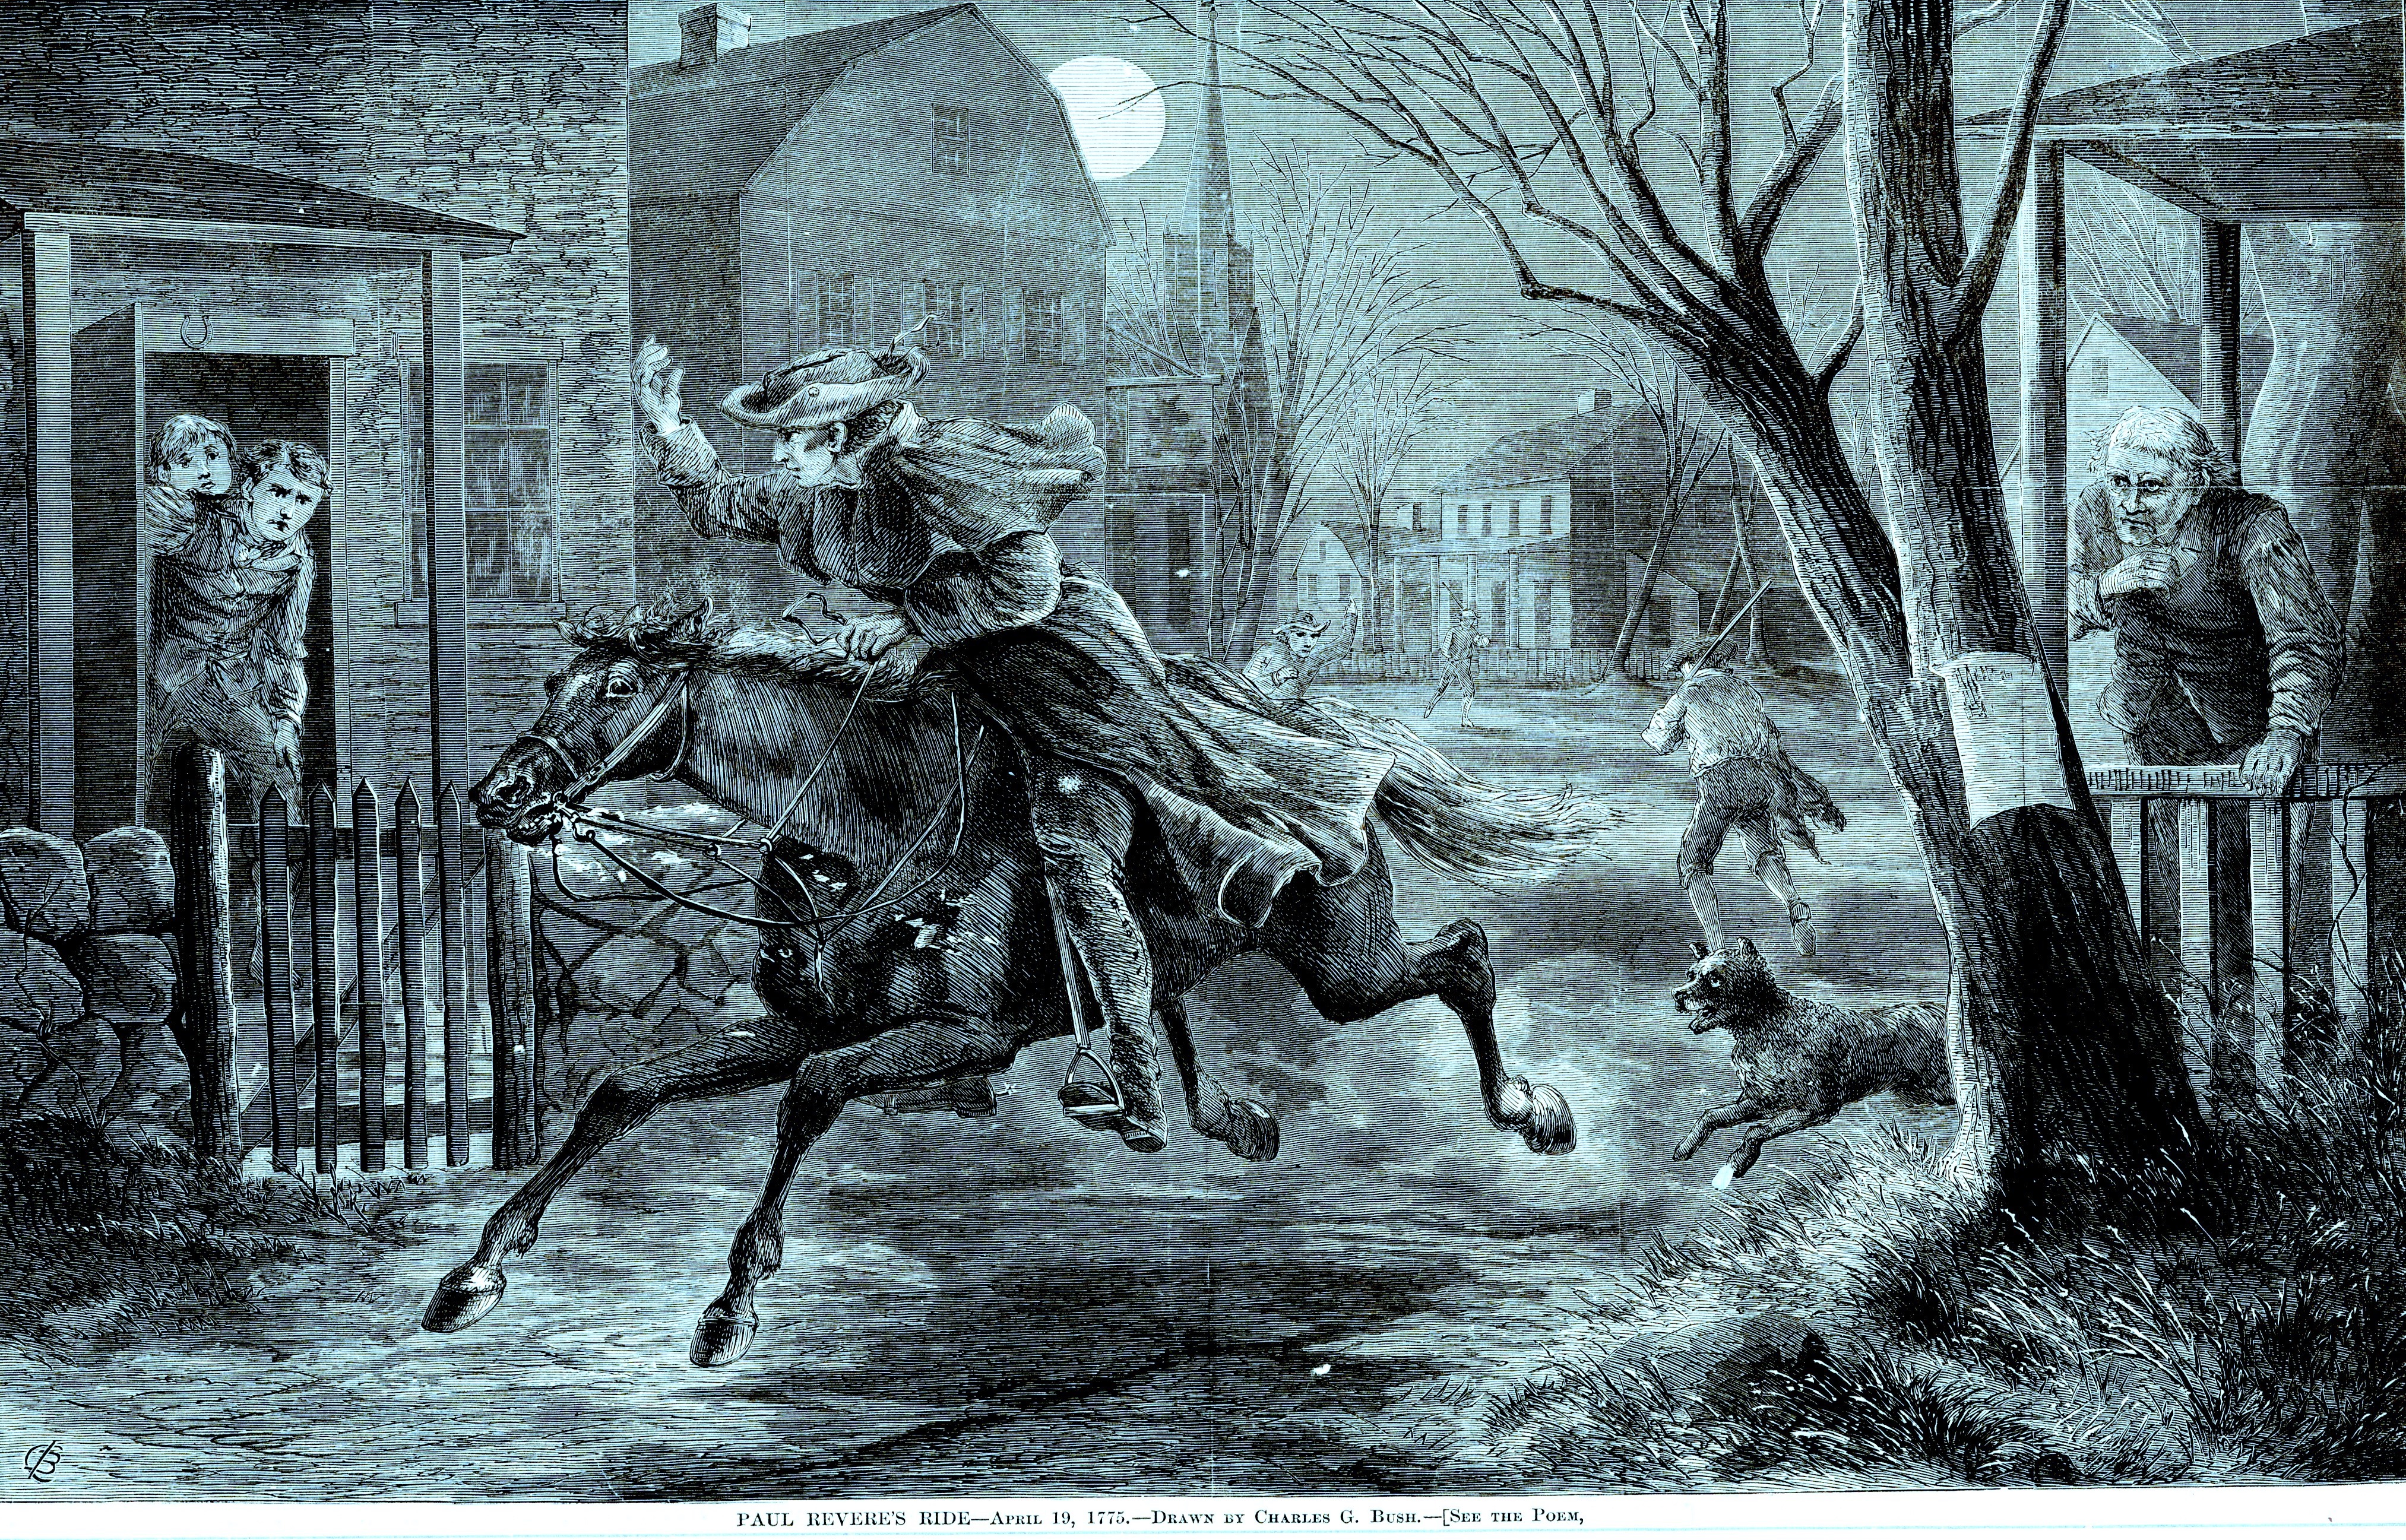 nypl.digitalcollections- midnight ride of Paul Revere's Ride April 19, 1775 - Charles G. Bus